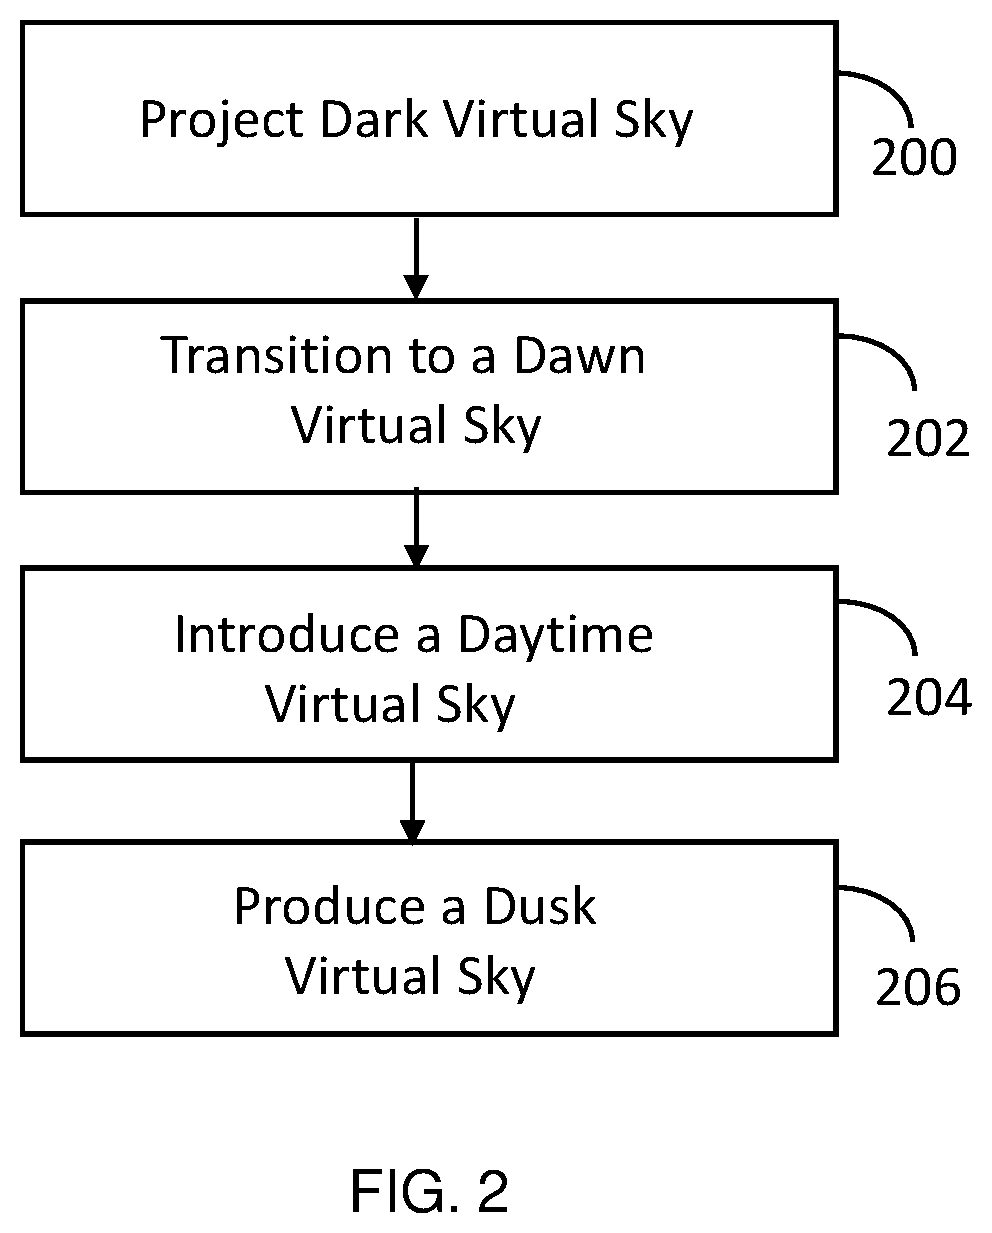 Apparatus and method to mitigate trauma via color palette transitions in a virtual sky projected in a digital space with a collection of gaze points experiencing cyclical size changes